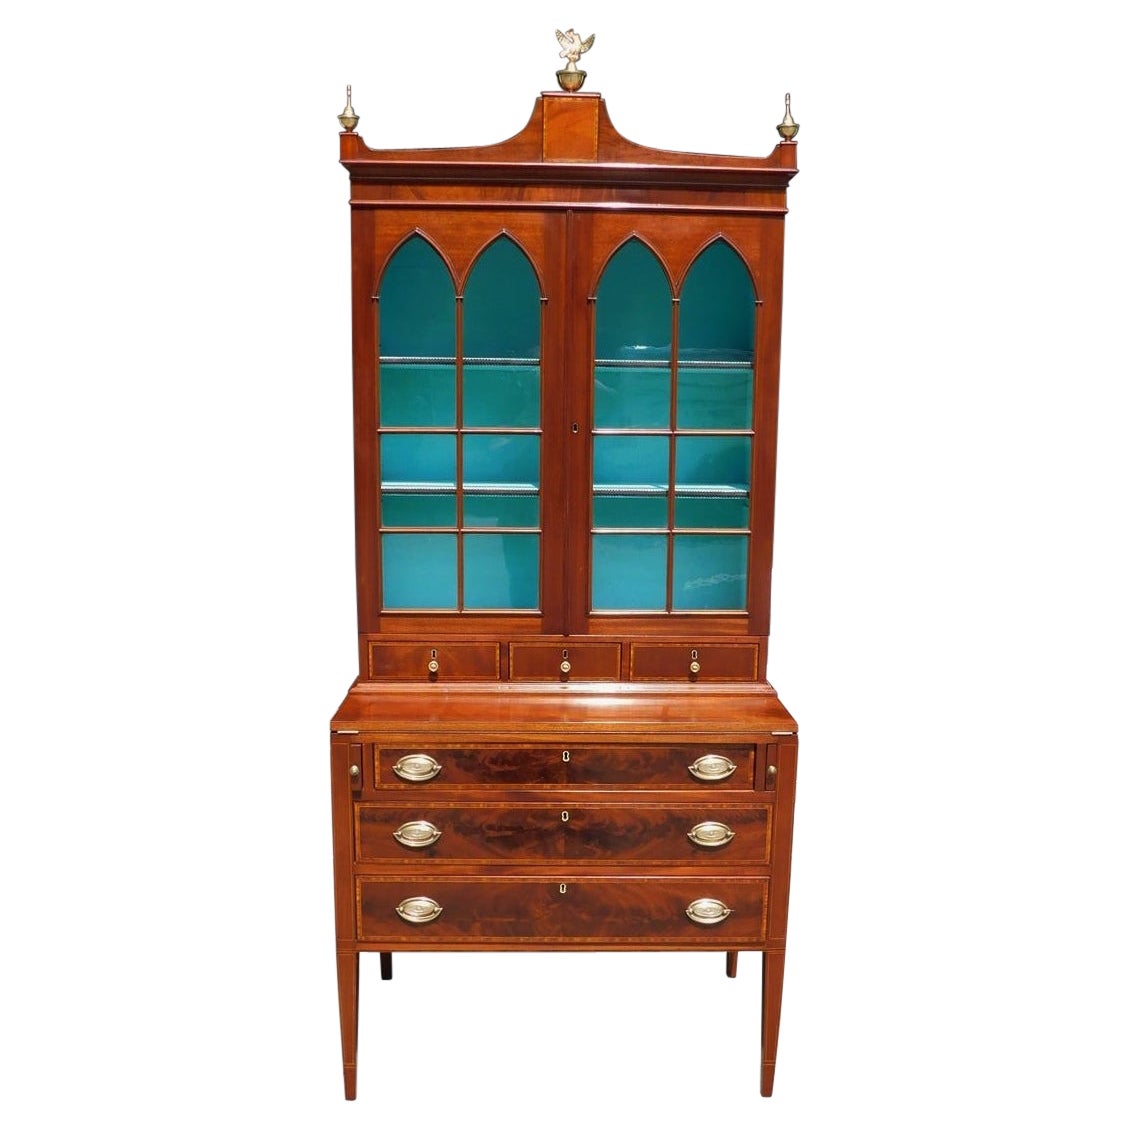 American Hepplewhite Mahogany Inlaid Fall Front Secretary with Bookcase, C. 1790 For Sale